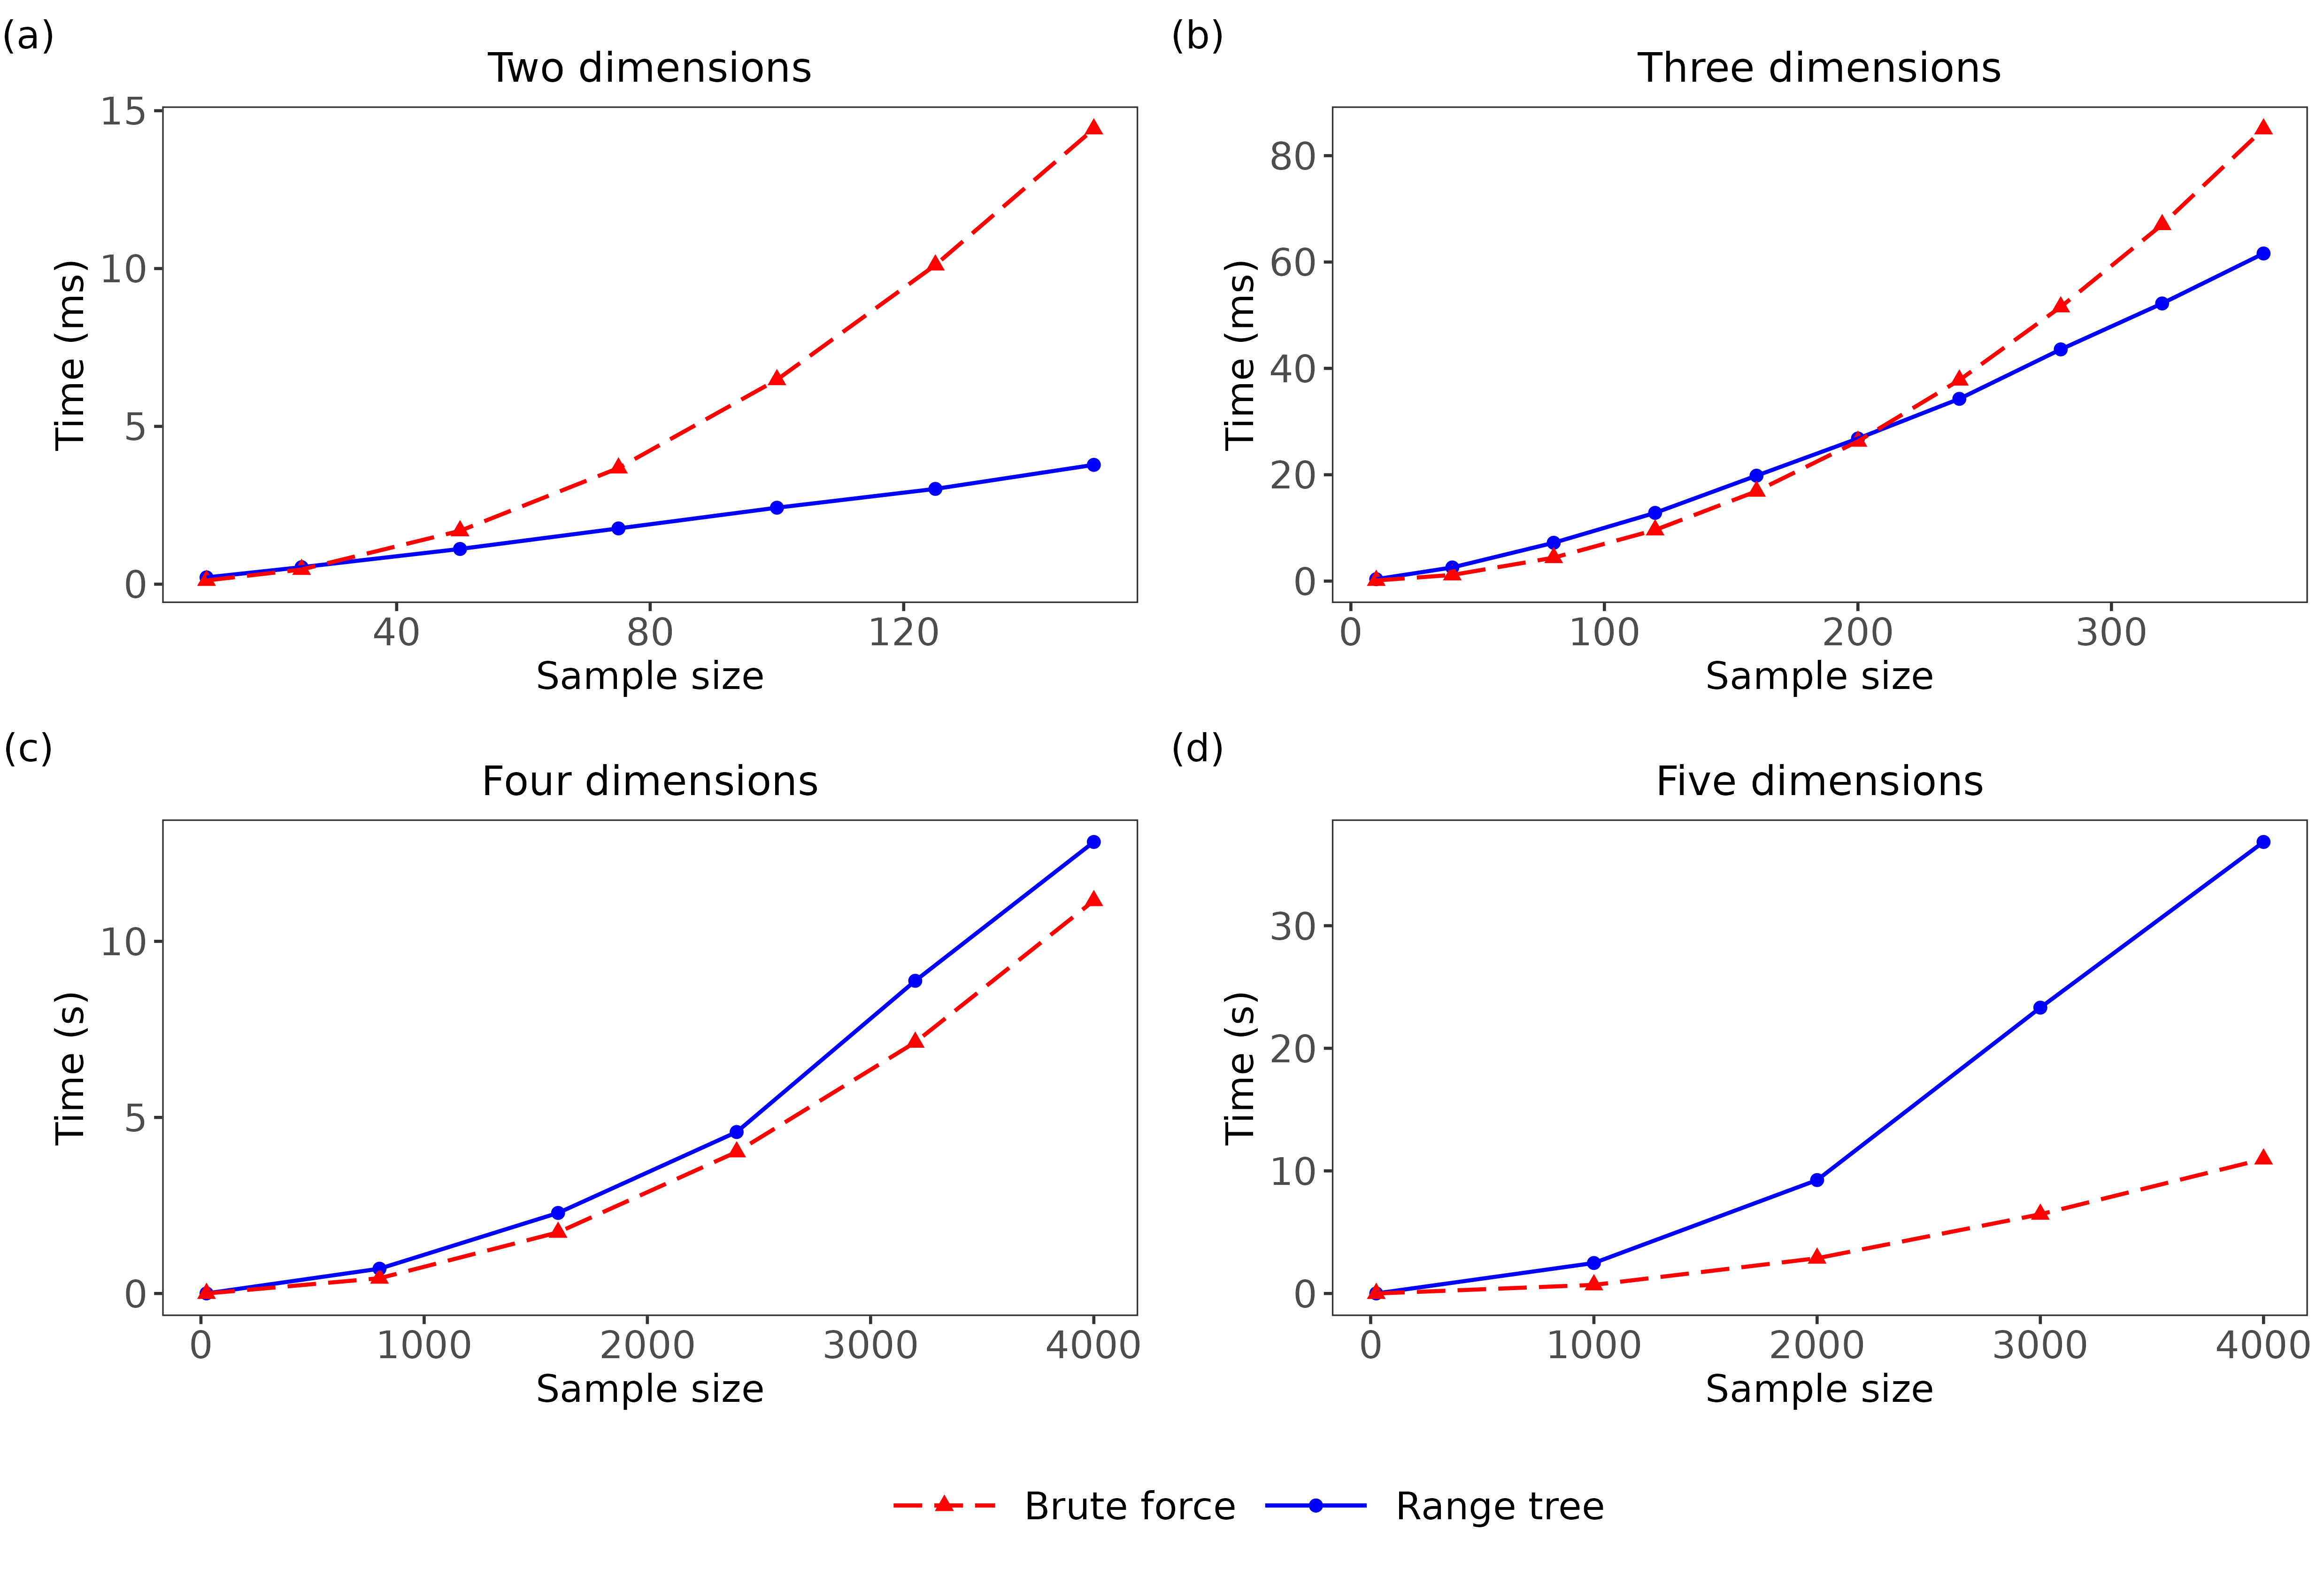 Figure 2: Time to compute the Fasano–Franceschini test statistic as a function of sample size, comparing the brute force and range tree methods for data of dimensions two through five. Points represent the mean time of 200 evaluations. Samples are taken to be of the same size and are drawn from multivariate standard normal distributions.